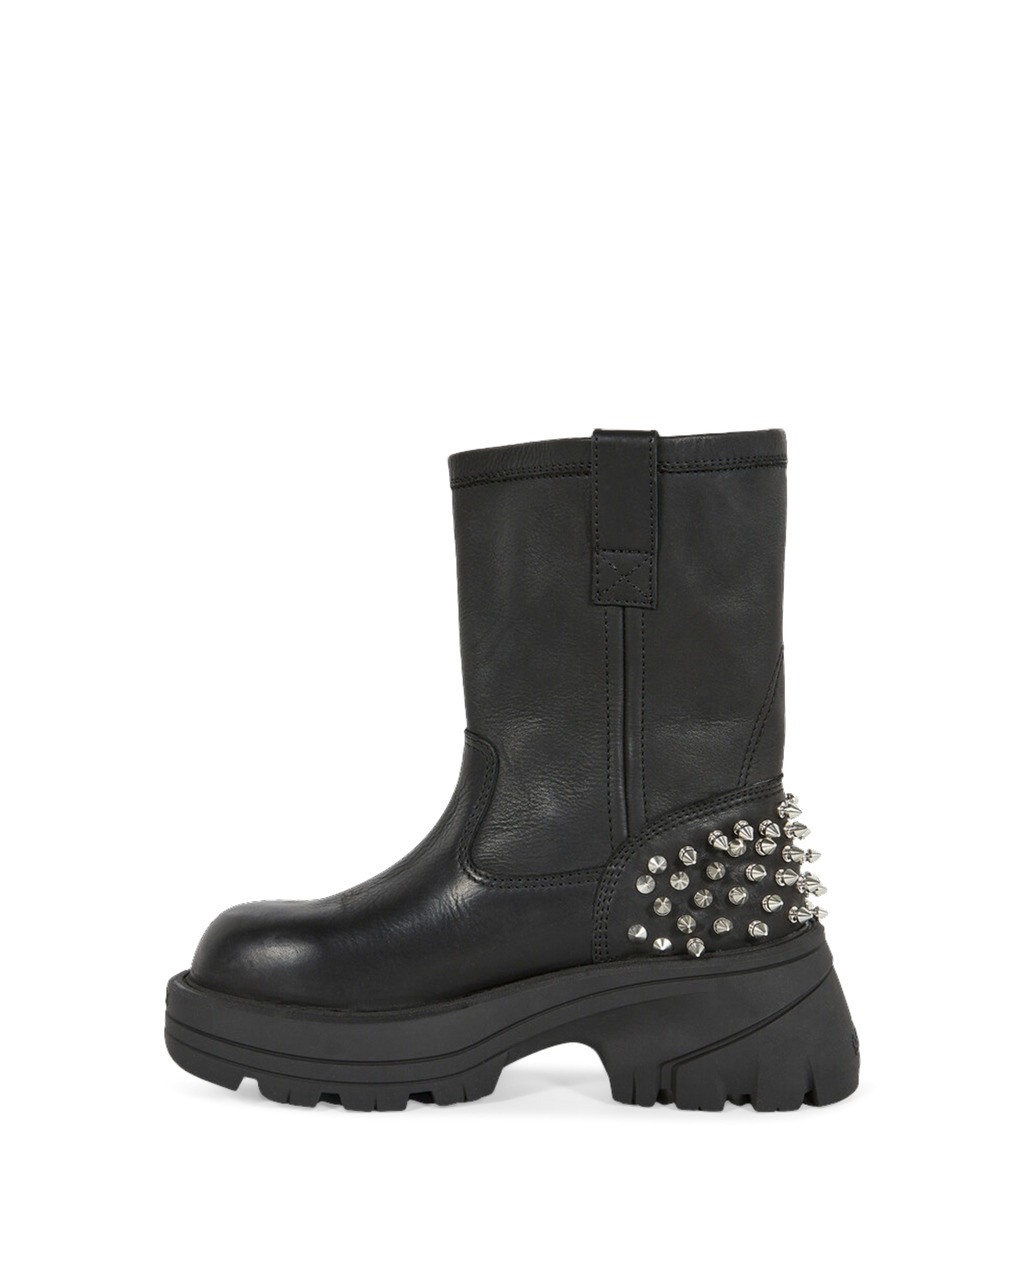 WORK BOOT WITH STUDS (C) - 3